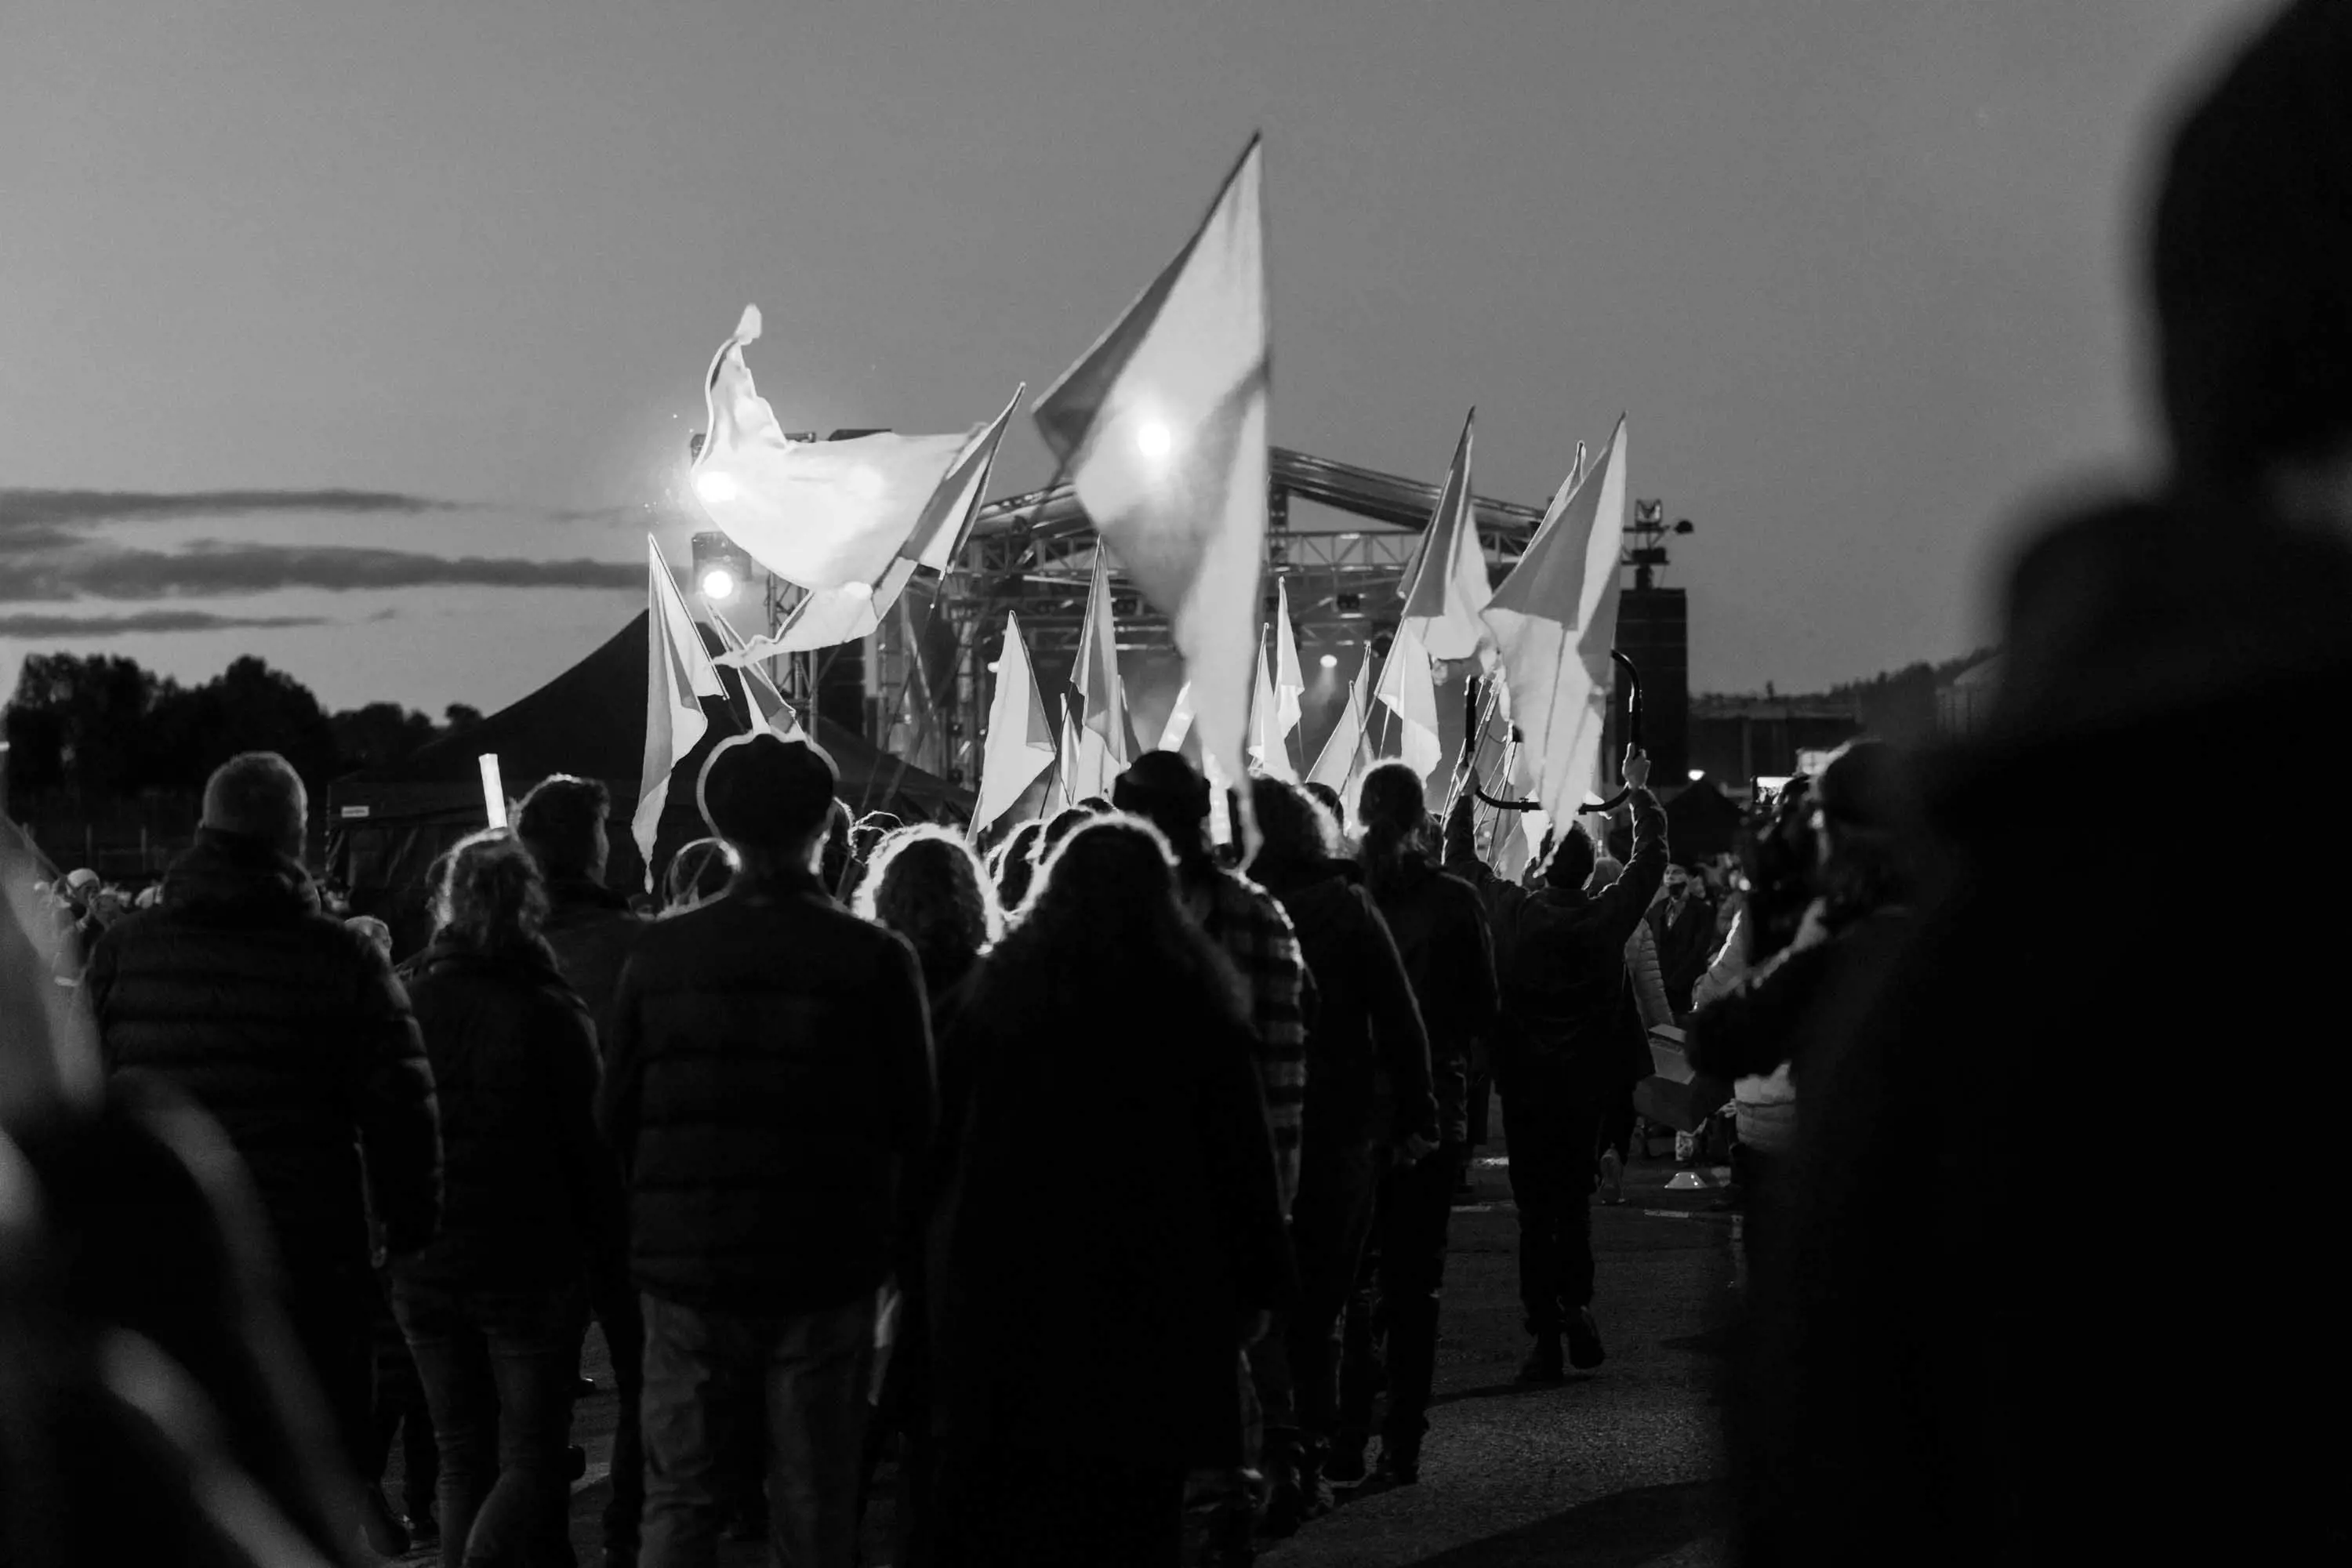 A large procession of people carrying flags walk in a long, sprawling line towards a performance stage in the background.